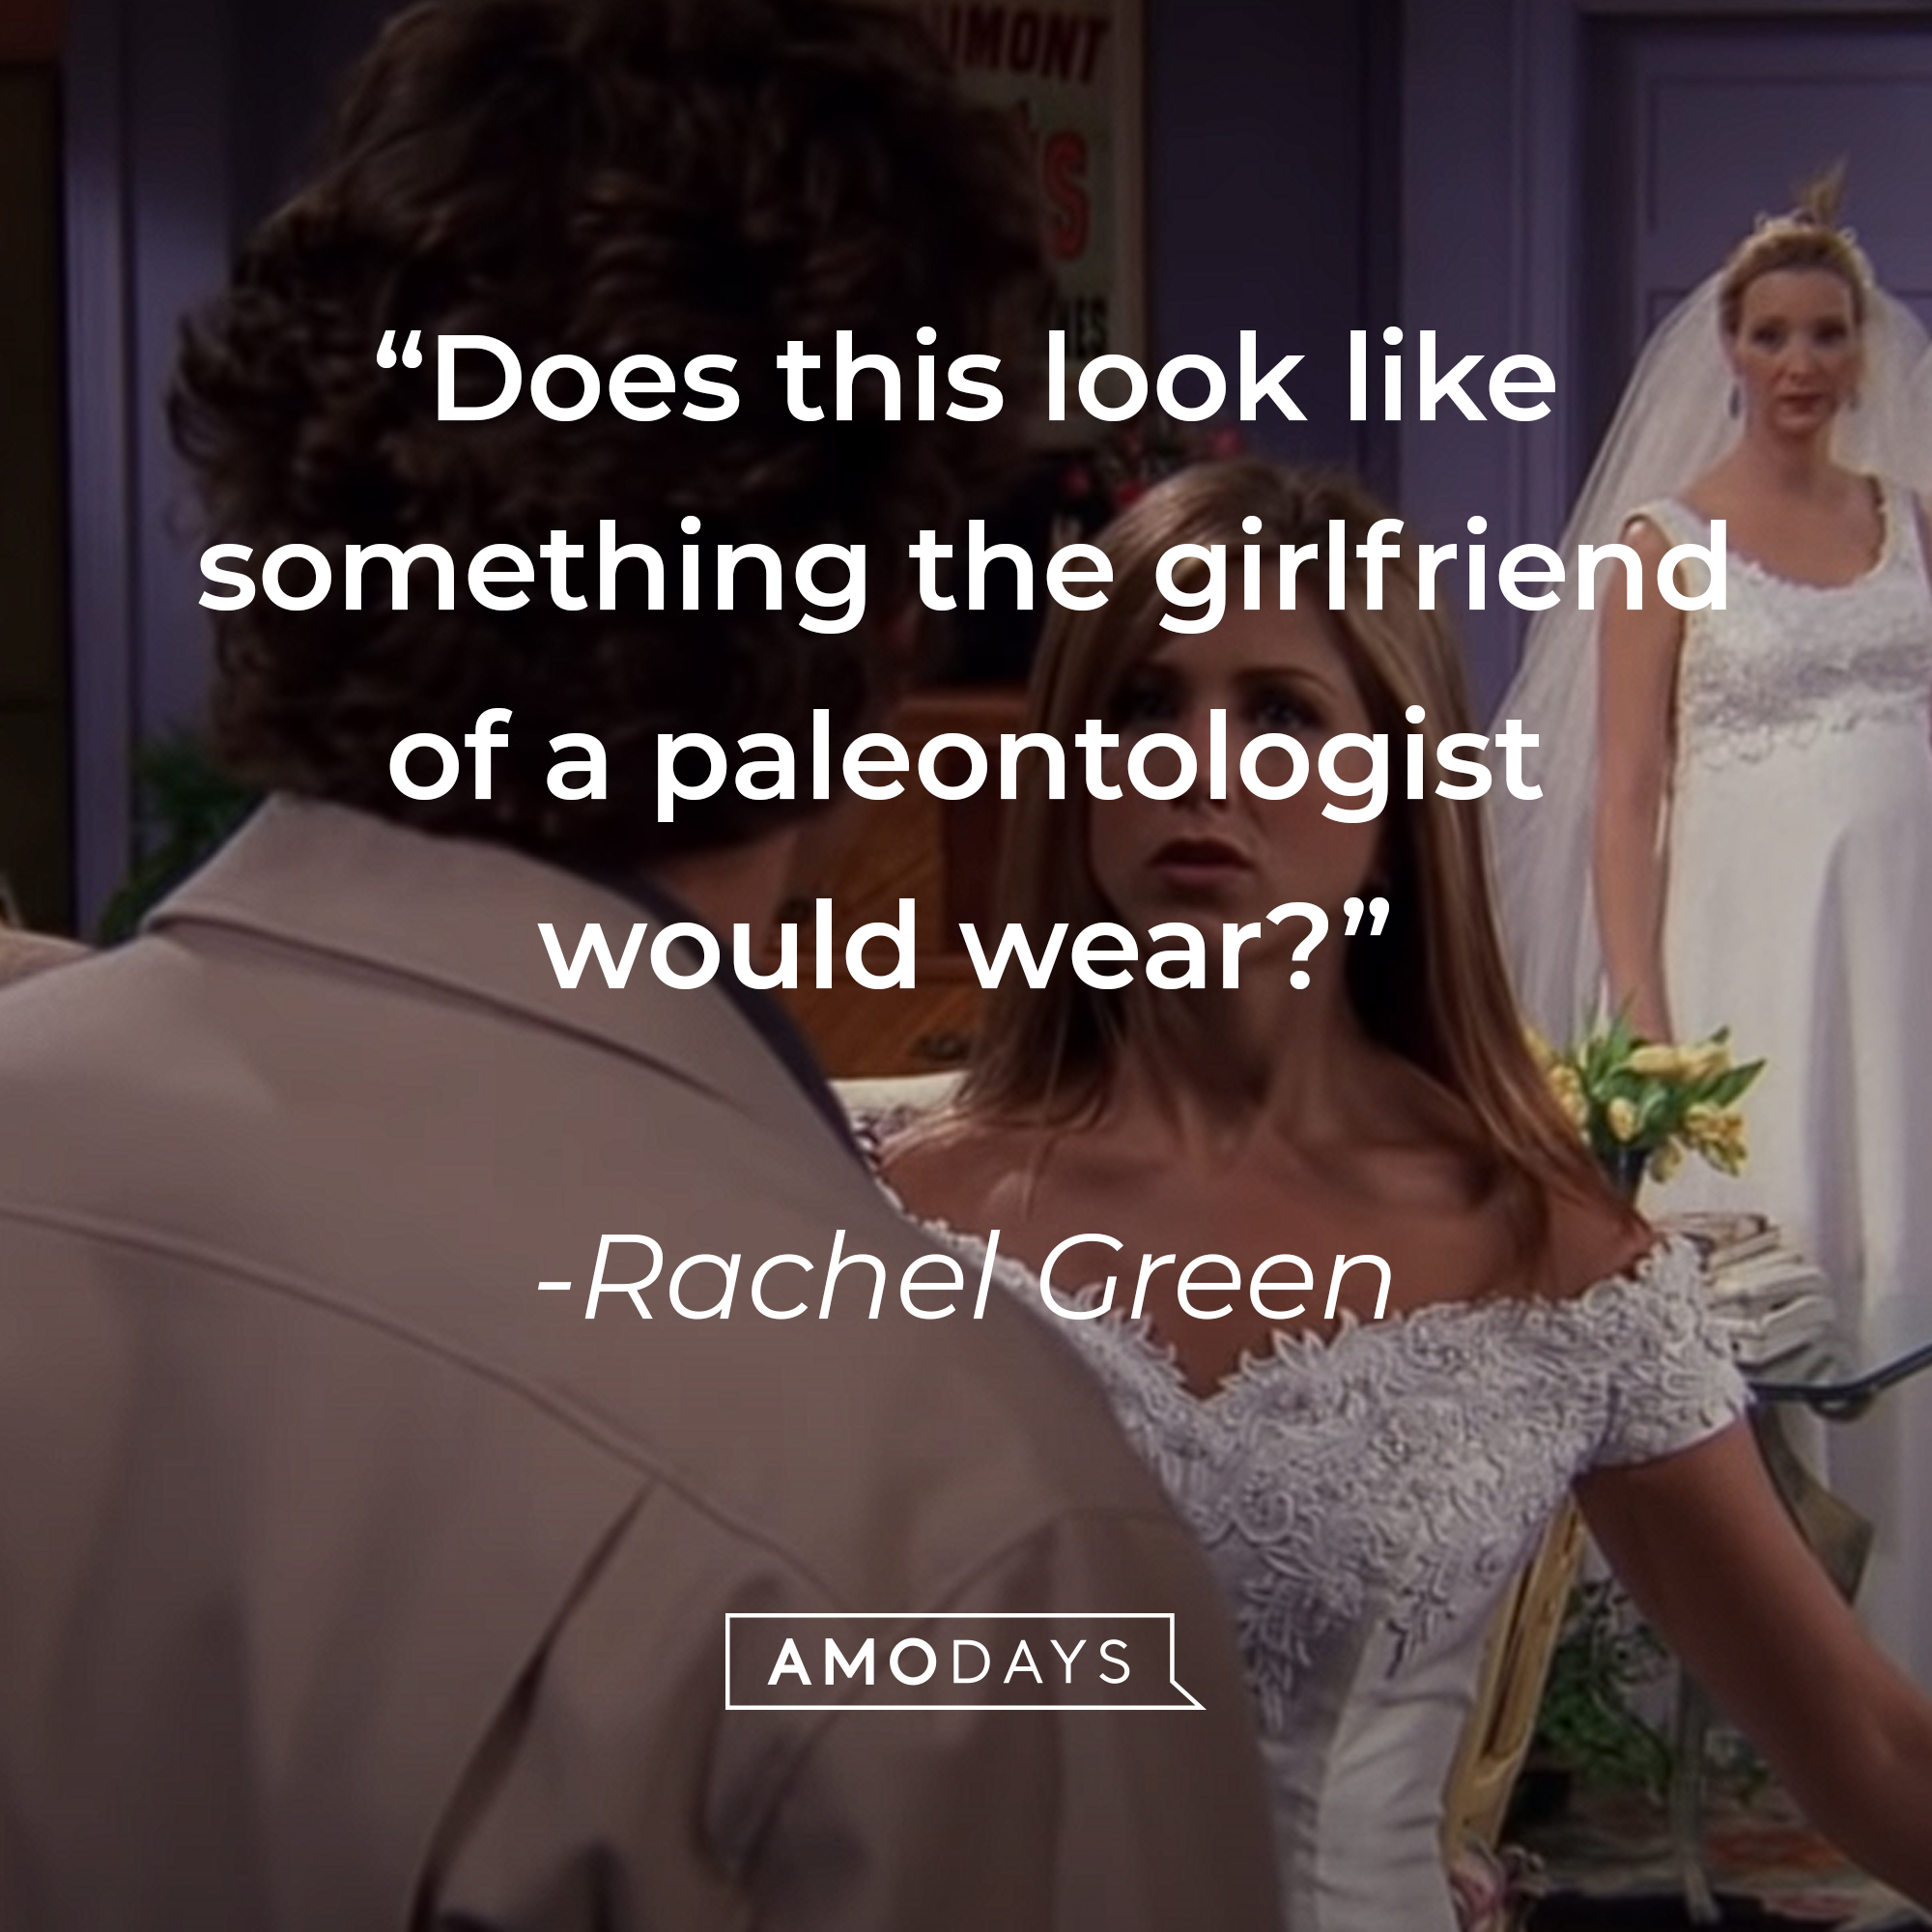 Rachel Green's quote: "Does this look like something the girlfriend of a paleontologist would wear?" | Source: youtube.com/warnerbrostv